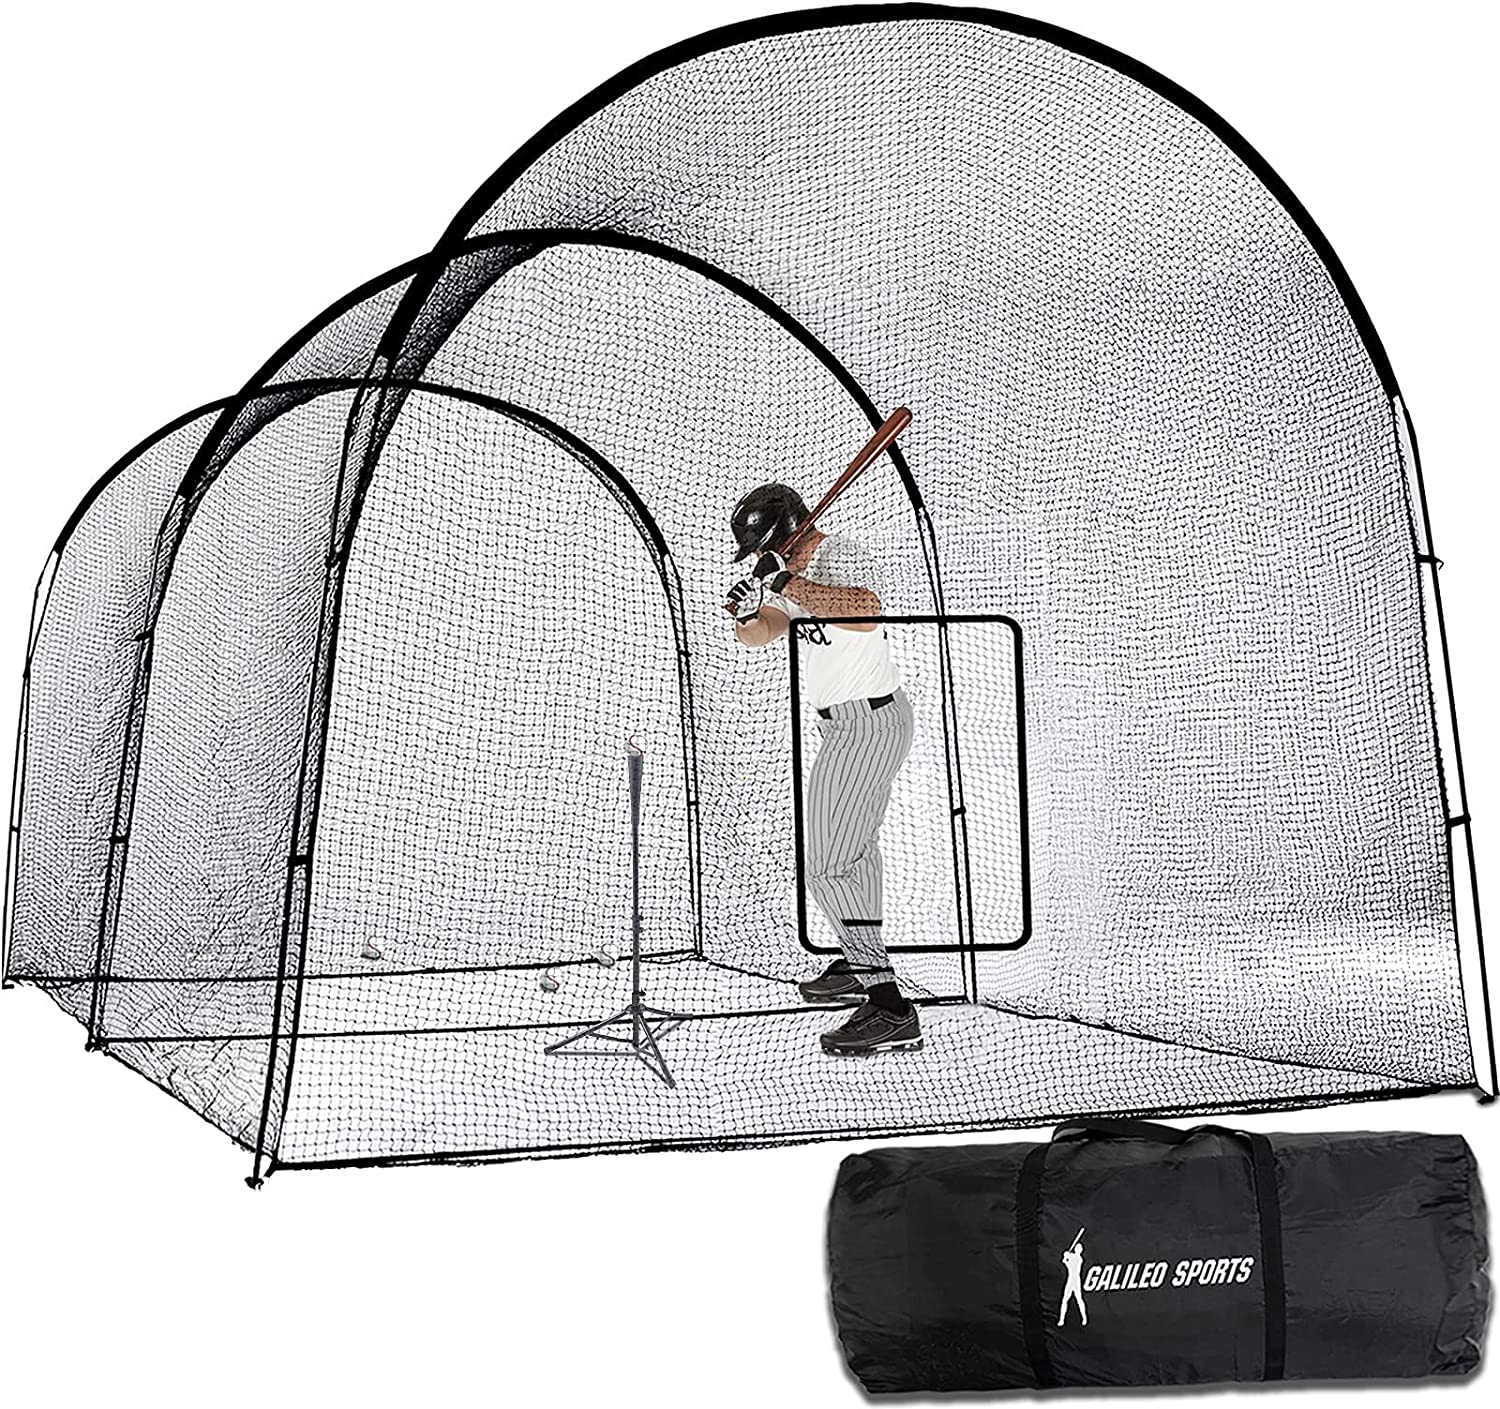 Gagalileo Batting Cage Baseball Cage Net Softball Cages, Heavy Duty Netting Backstop for Backyard, Training Softball Baseball for Pitching Pitchers 22x12x10FT